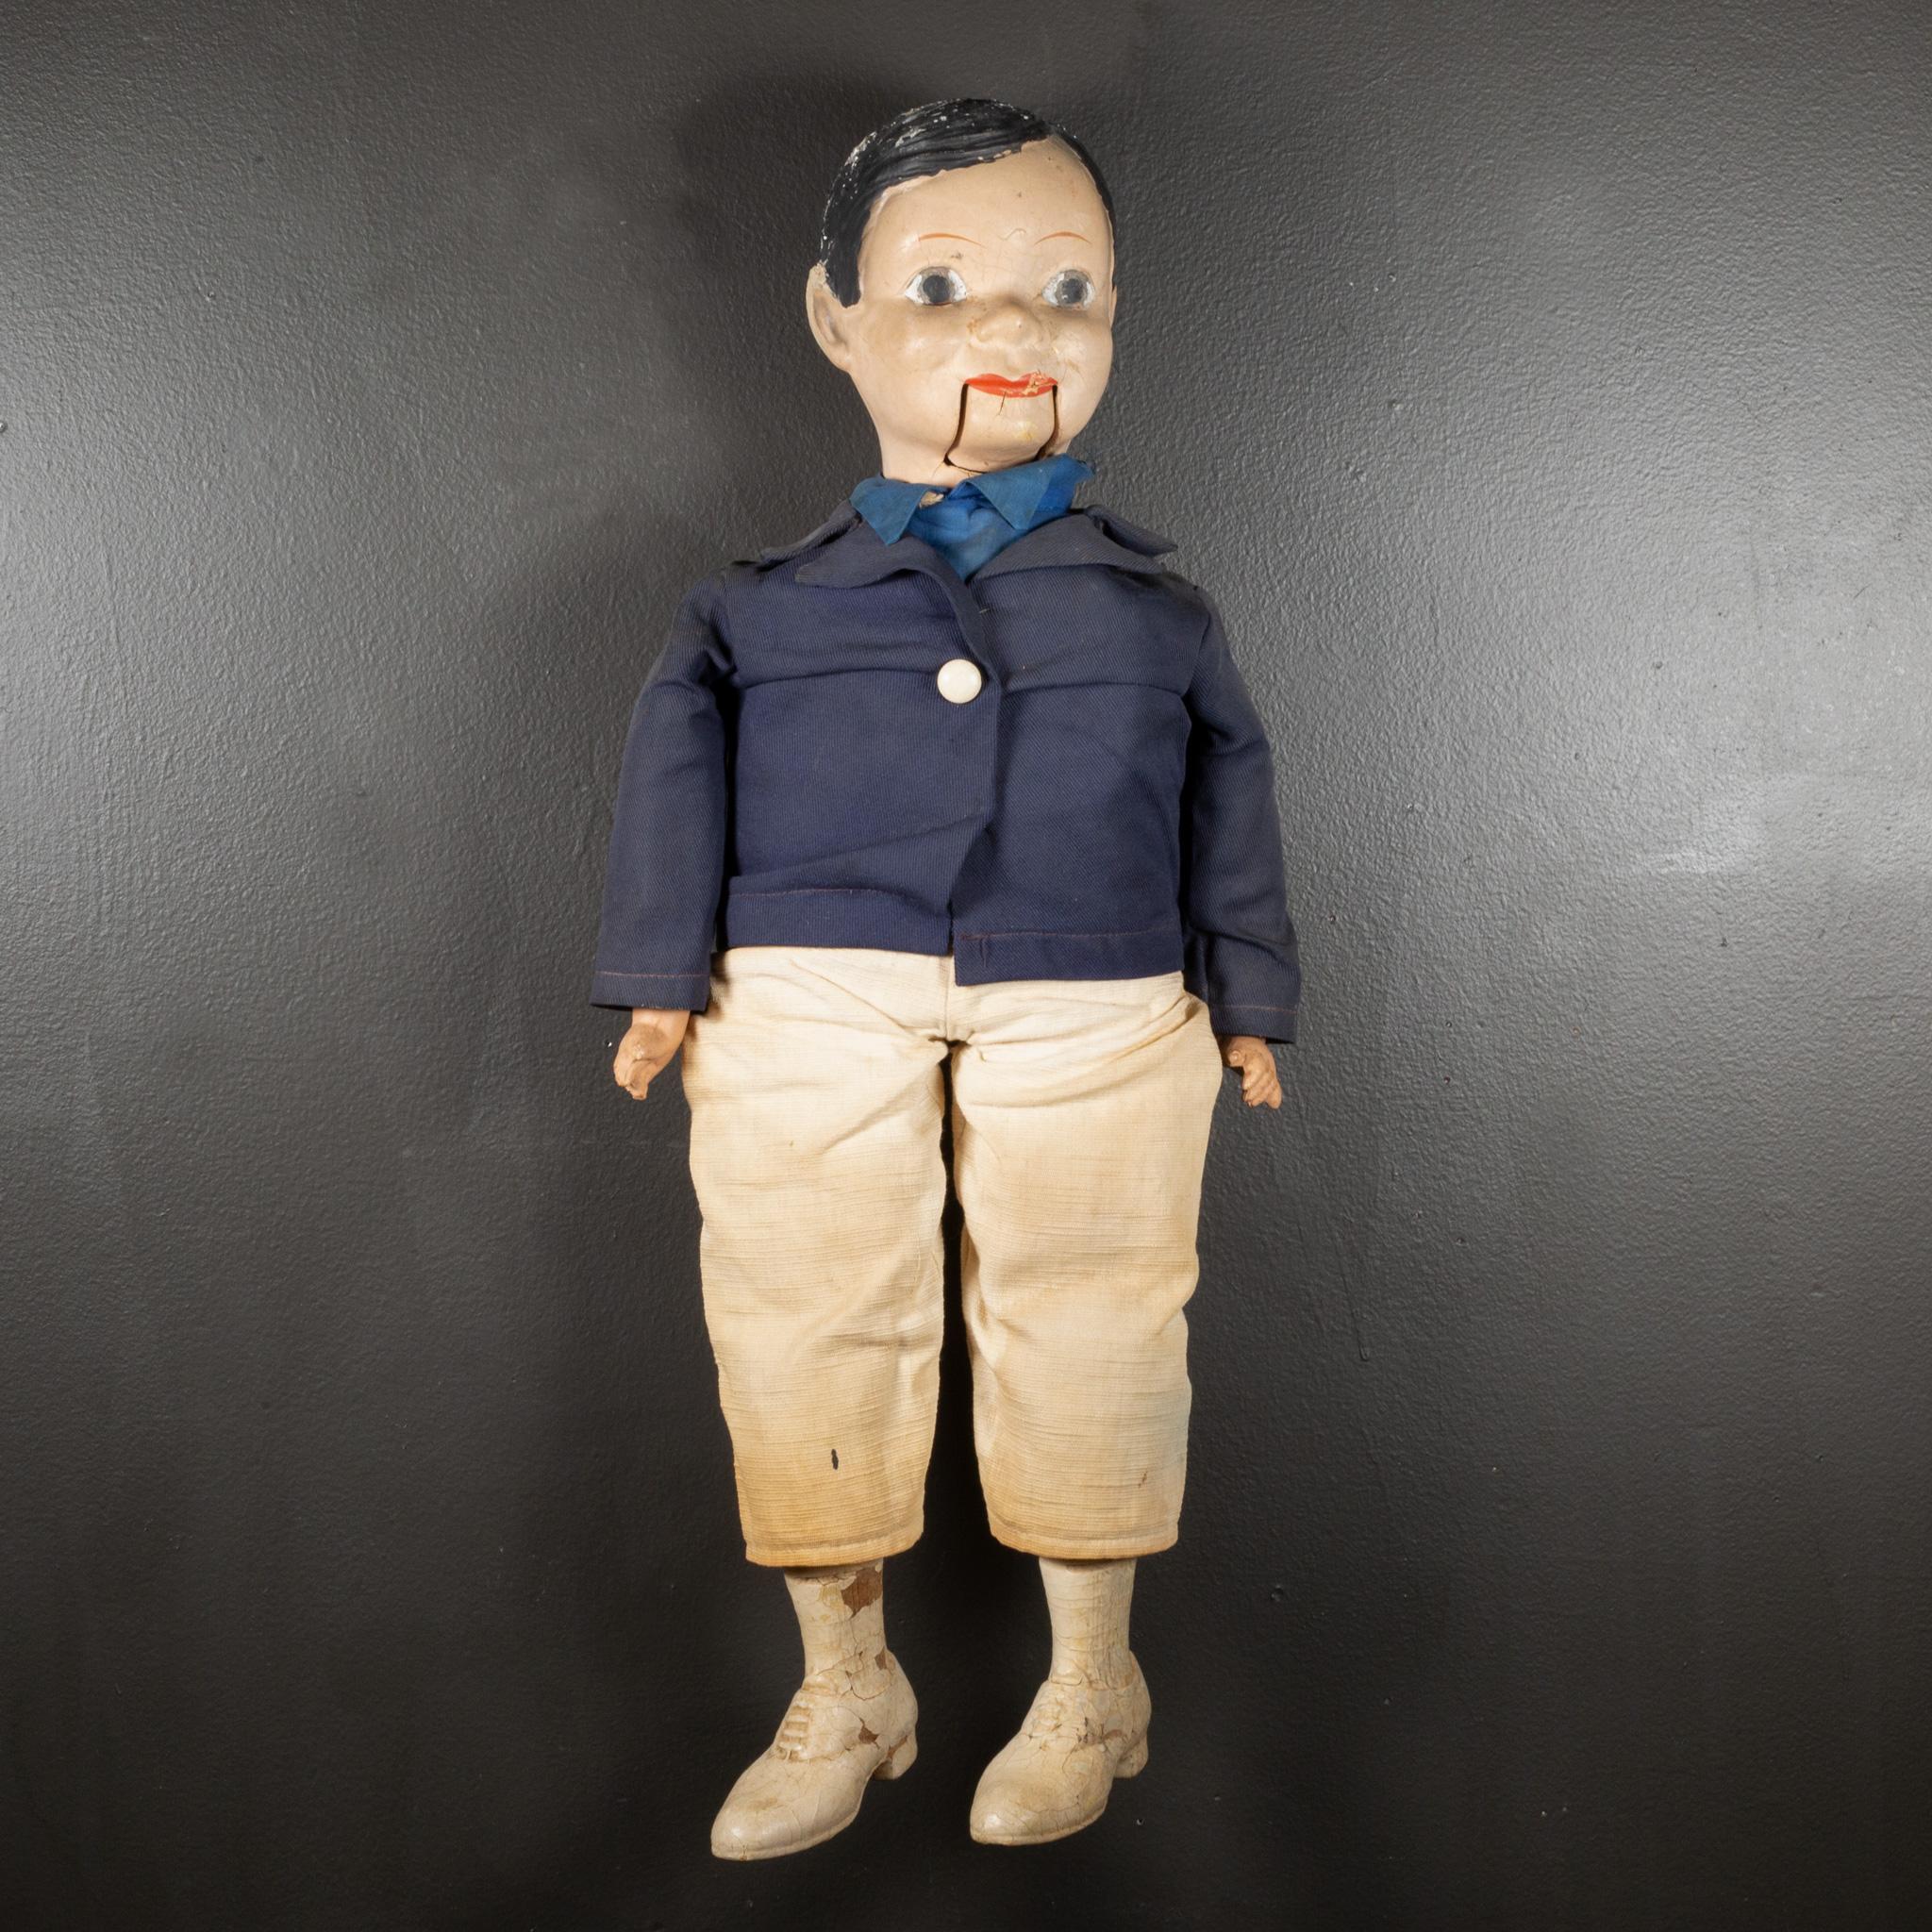 About

An original ventriloquist dummy. Painted composite head with movable mouth. Hole in the back for your hand to manipulate the mouth and rotate the head. Fabric clothes, wooden button with painted composite legs and shoes.

Creator